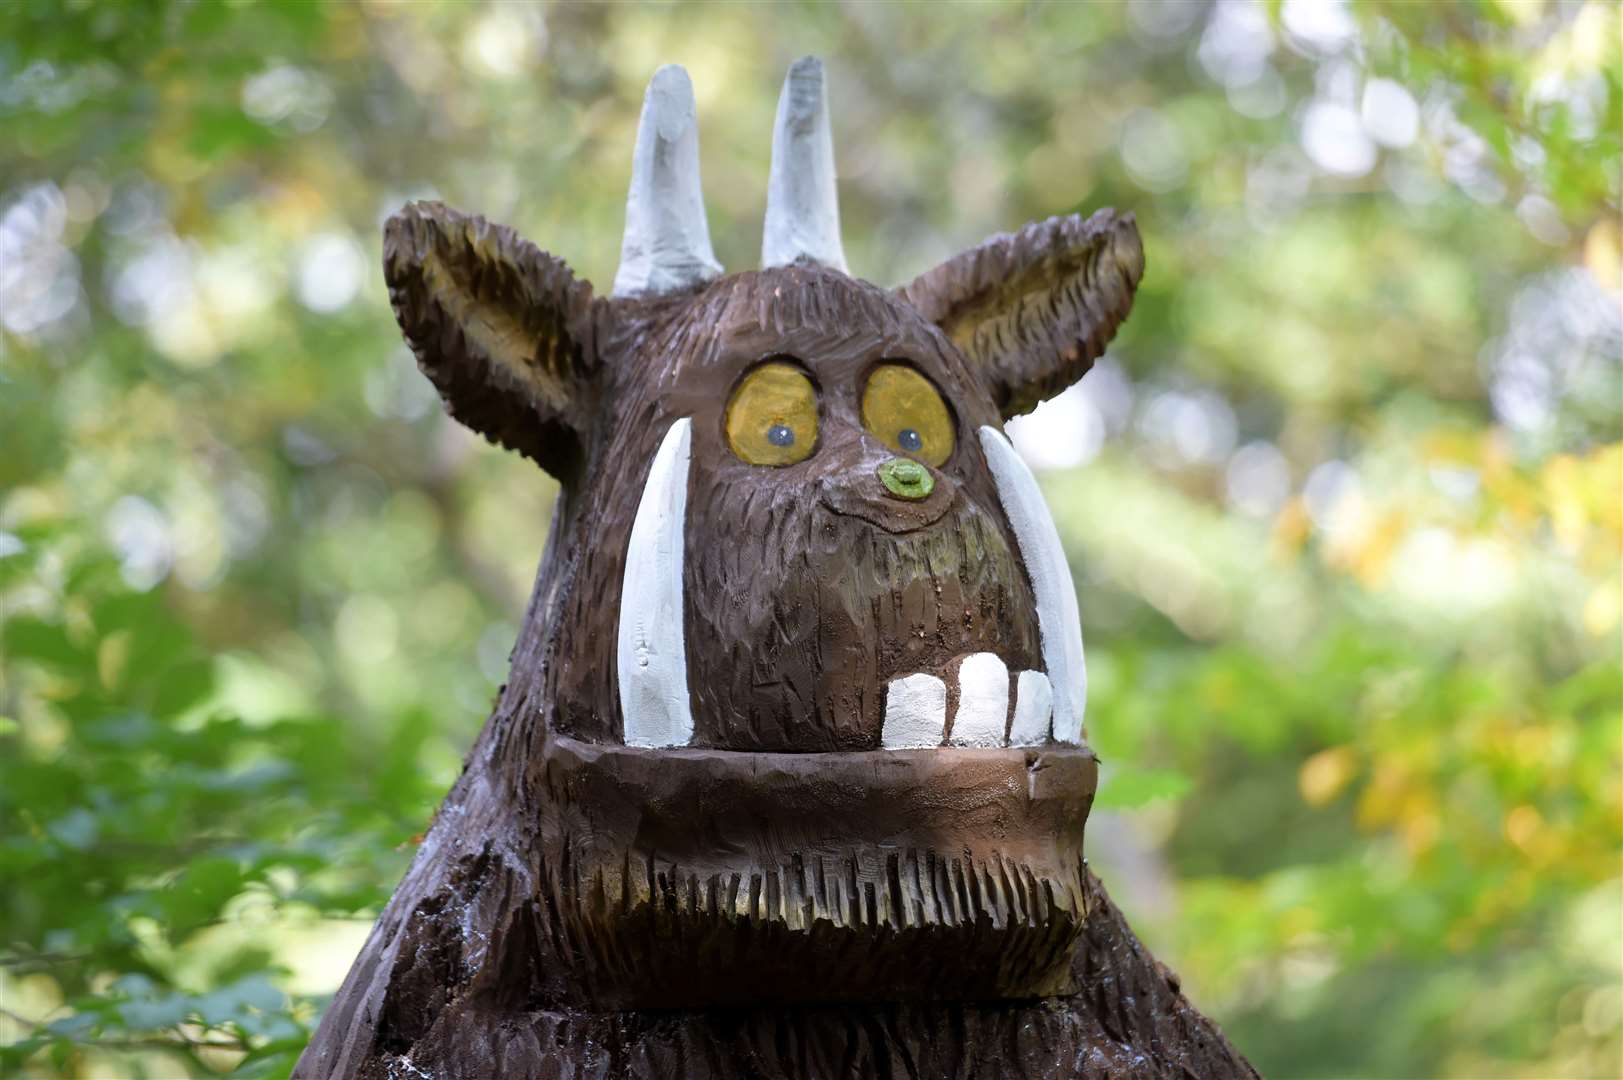 Repairs have been made to the Gruffalo....Picture: Callum Mackay